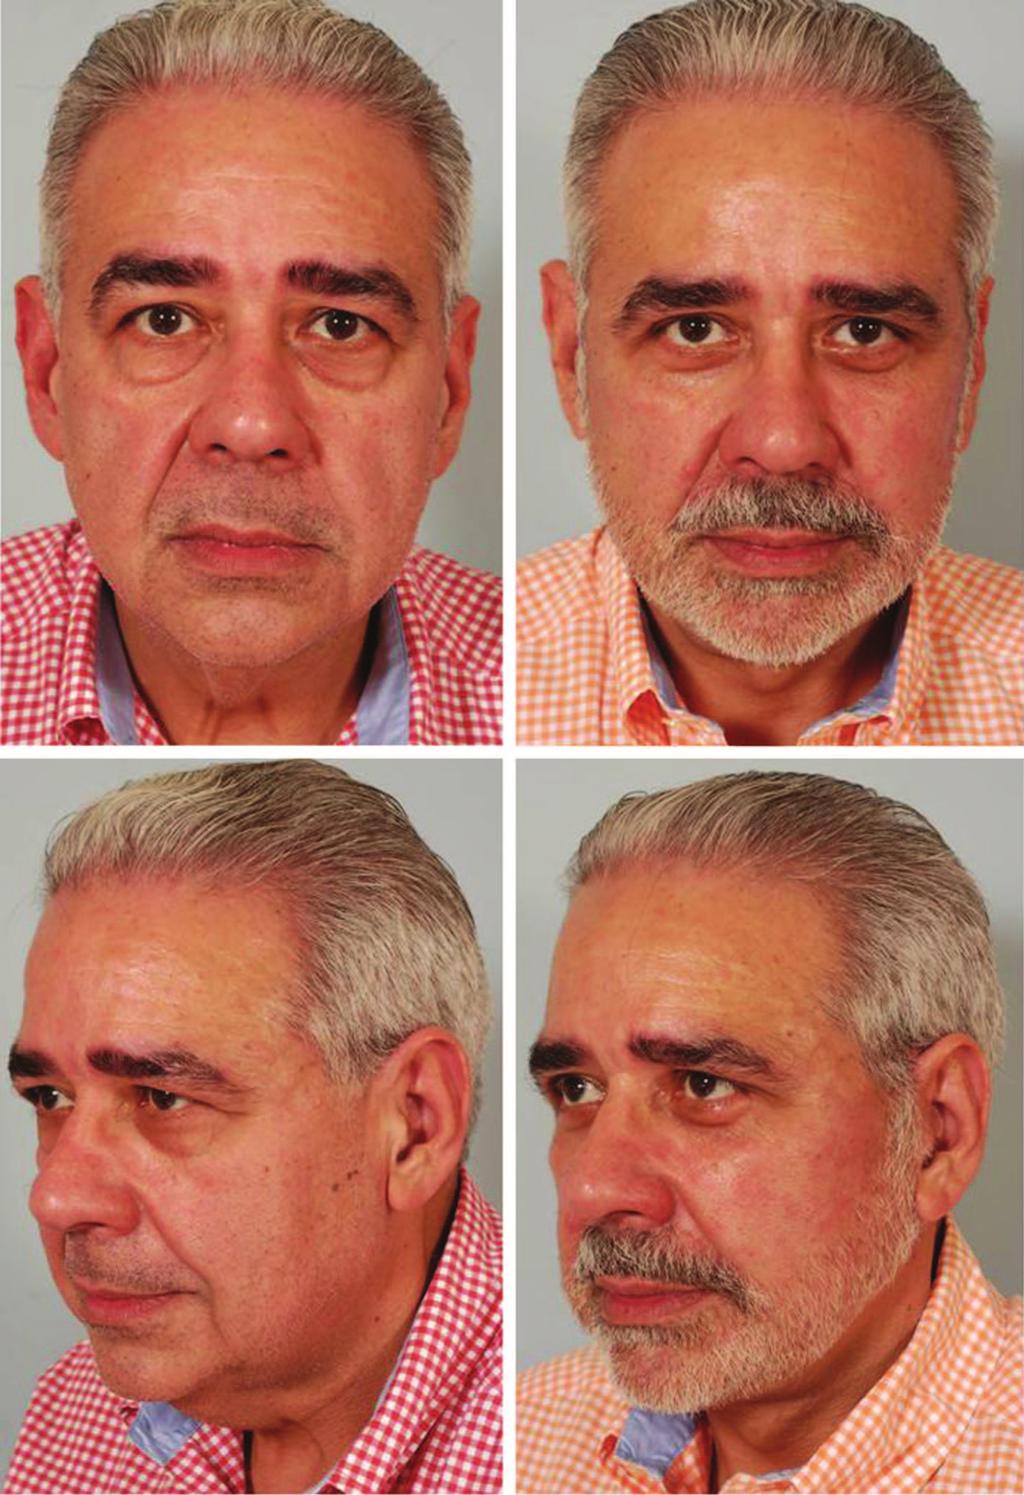 Volume 129, Number 5S Restoring Facial Shape in Face Lifting Fig. 3. (Left) Preoperative appearance of a 59-year-old man after a 90-pound weight loss from a gastric bypass procedure.